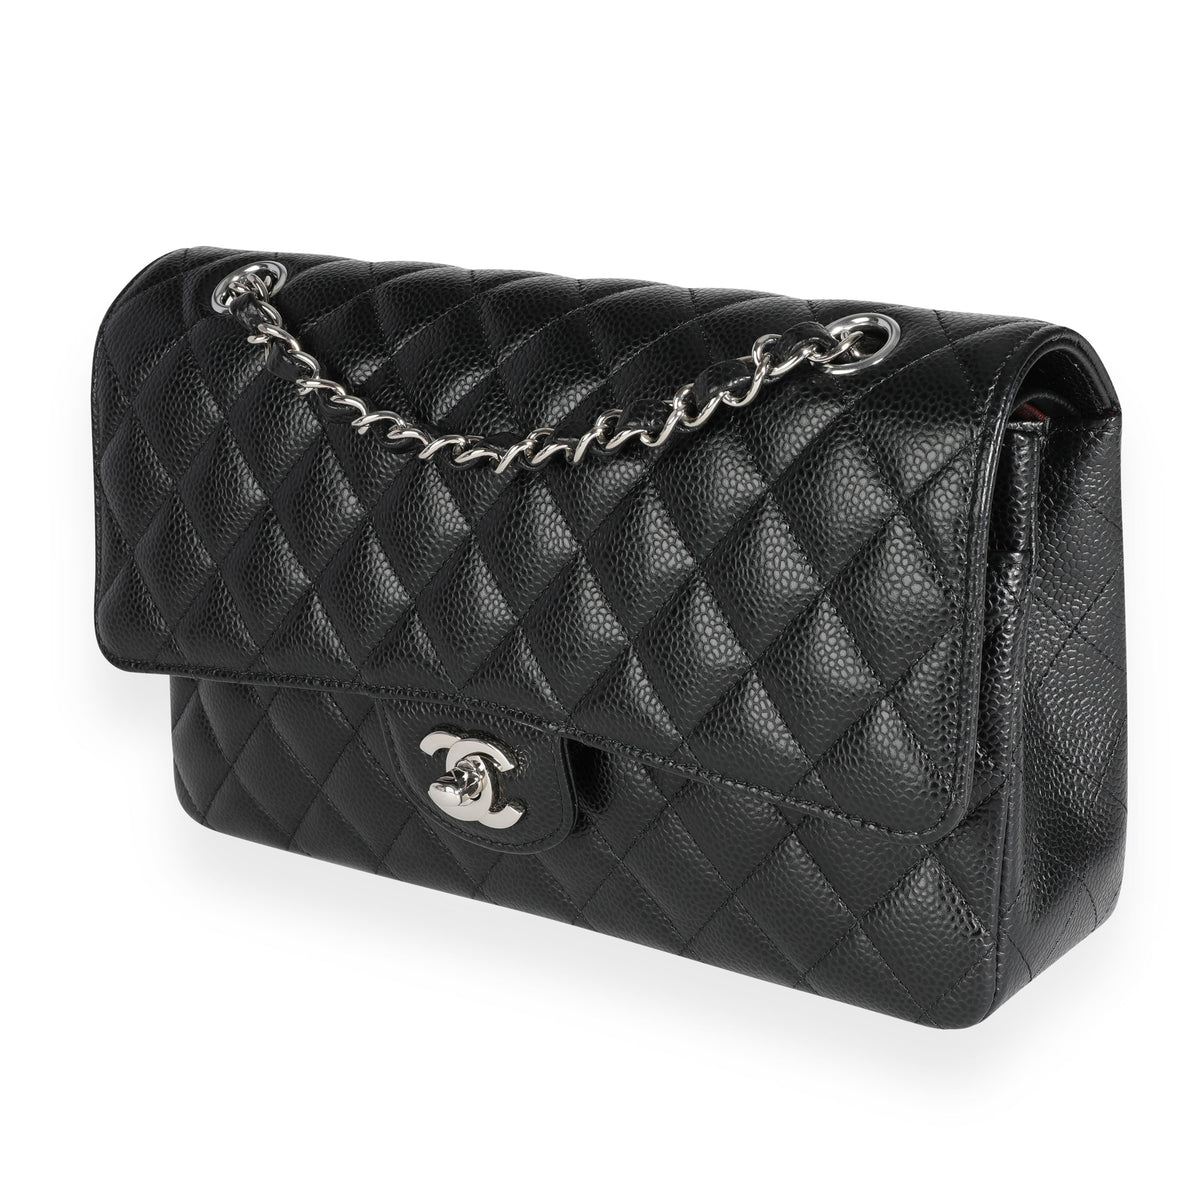 Chanel Black Caviar Quilted Medium Classic Double Flap Bag